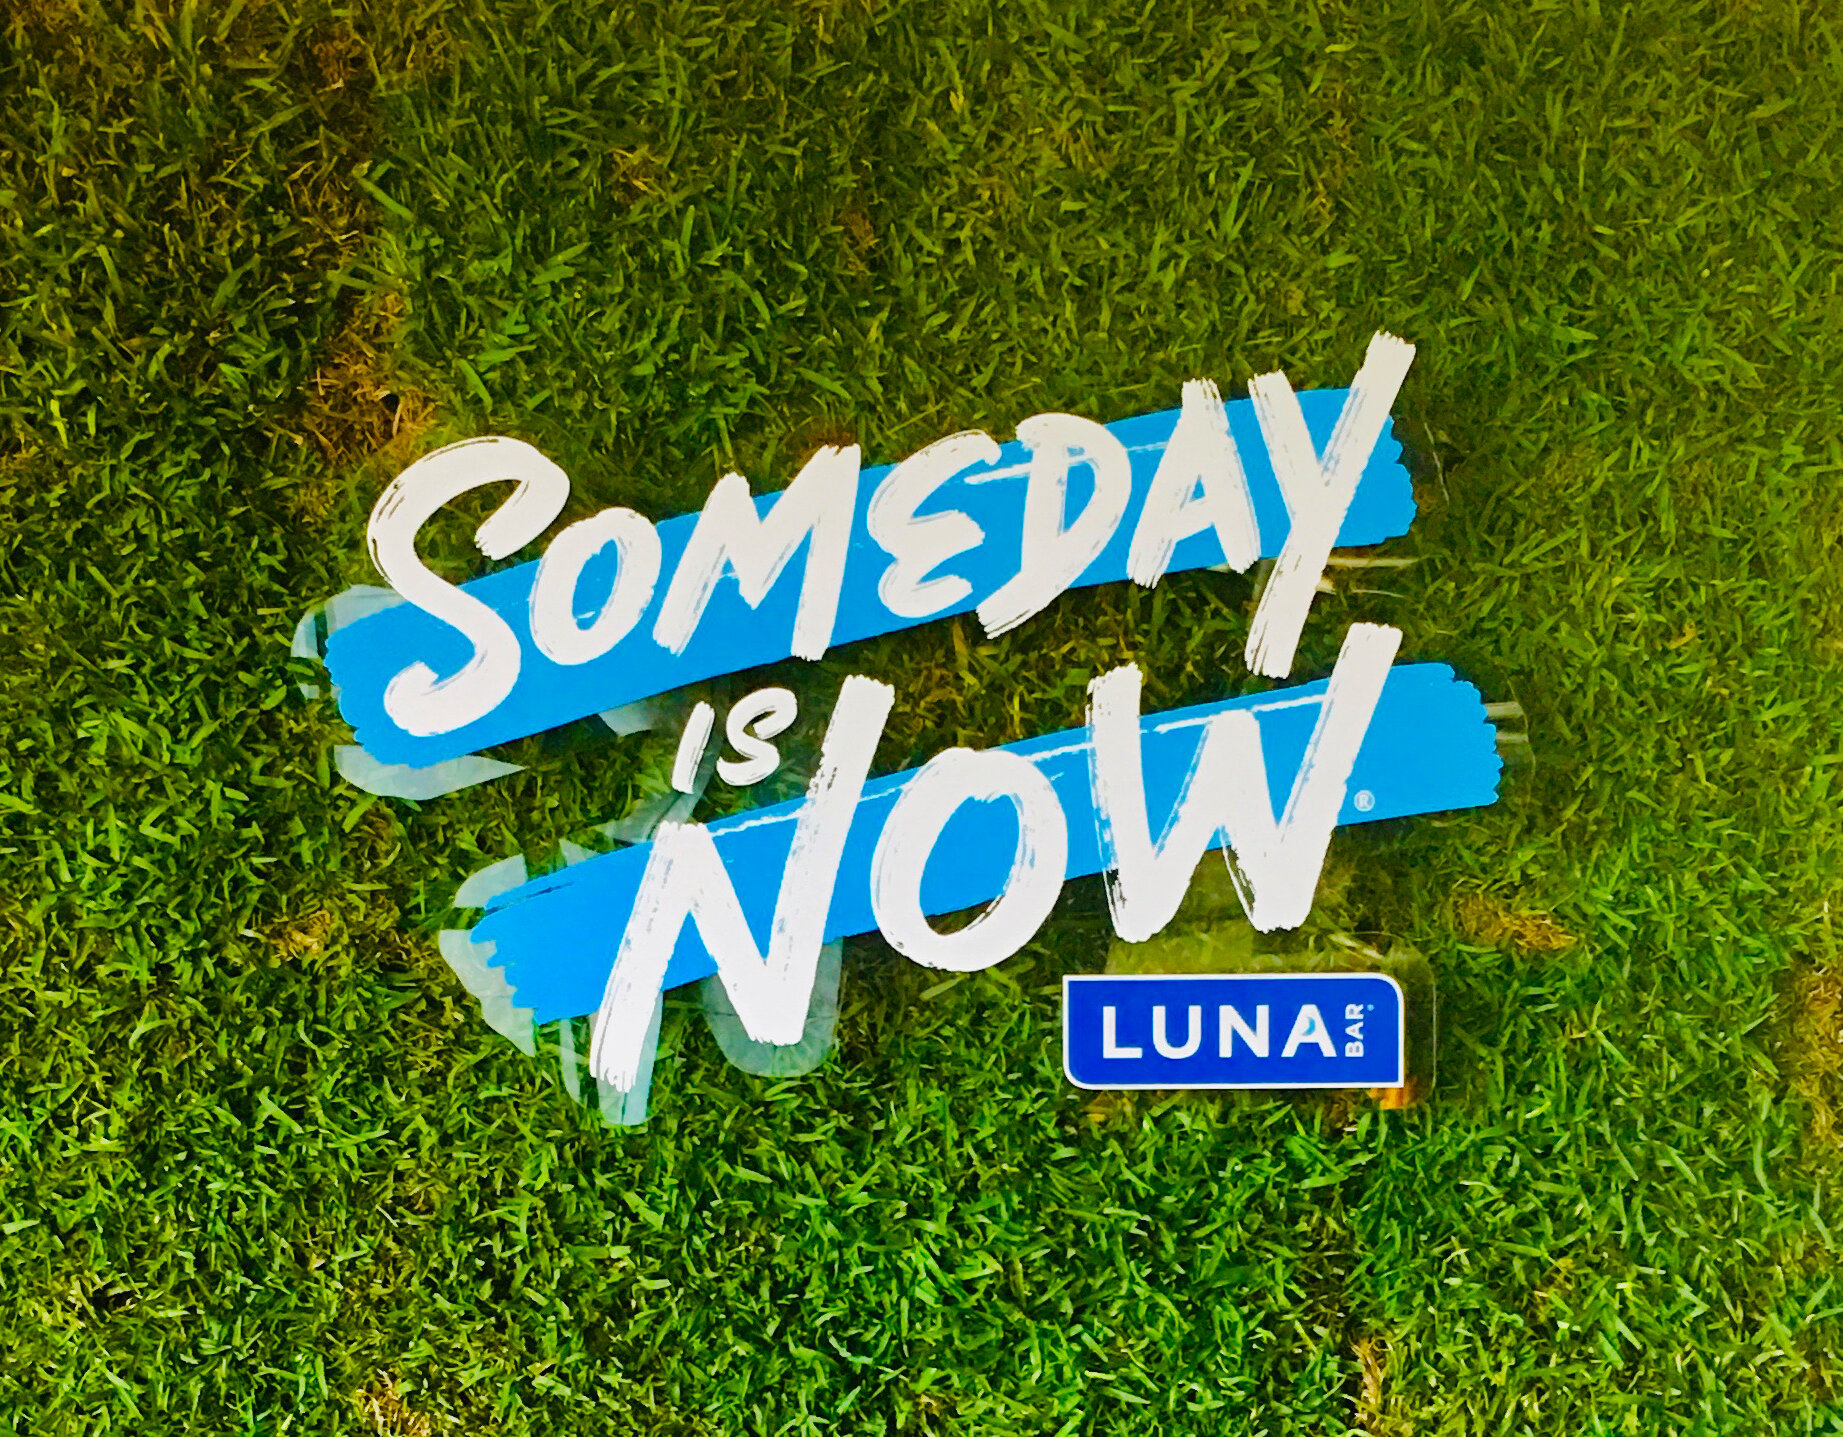 Luna Bar X 2019 USWNT World Cup Team: Someday is Now, Los Angeles, 2019